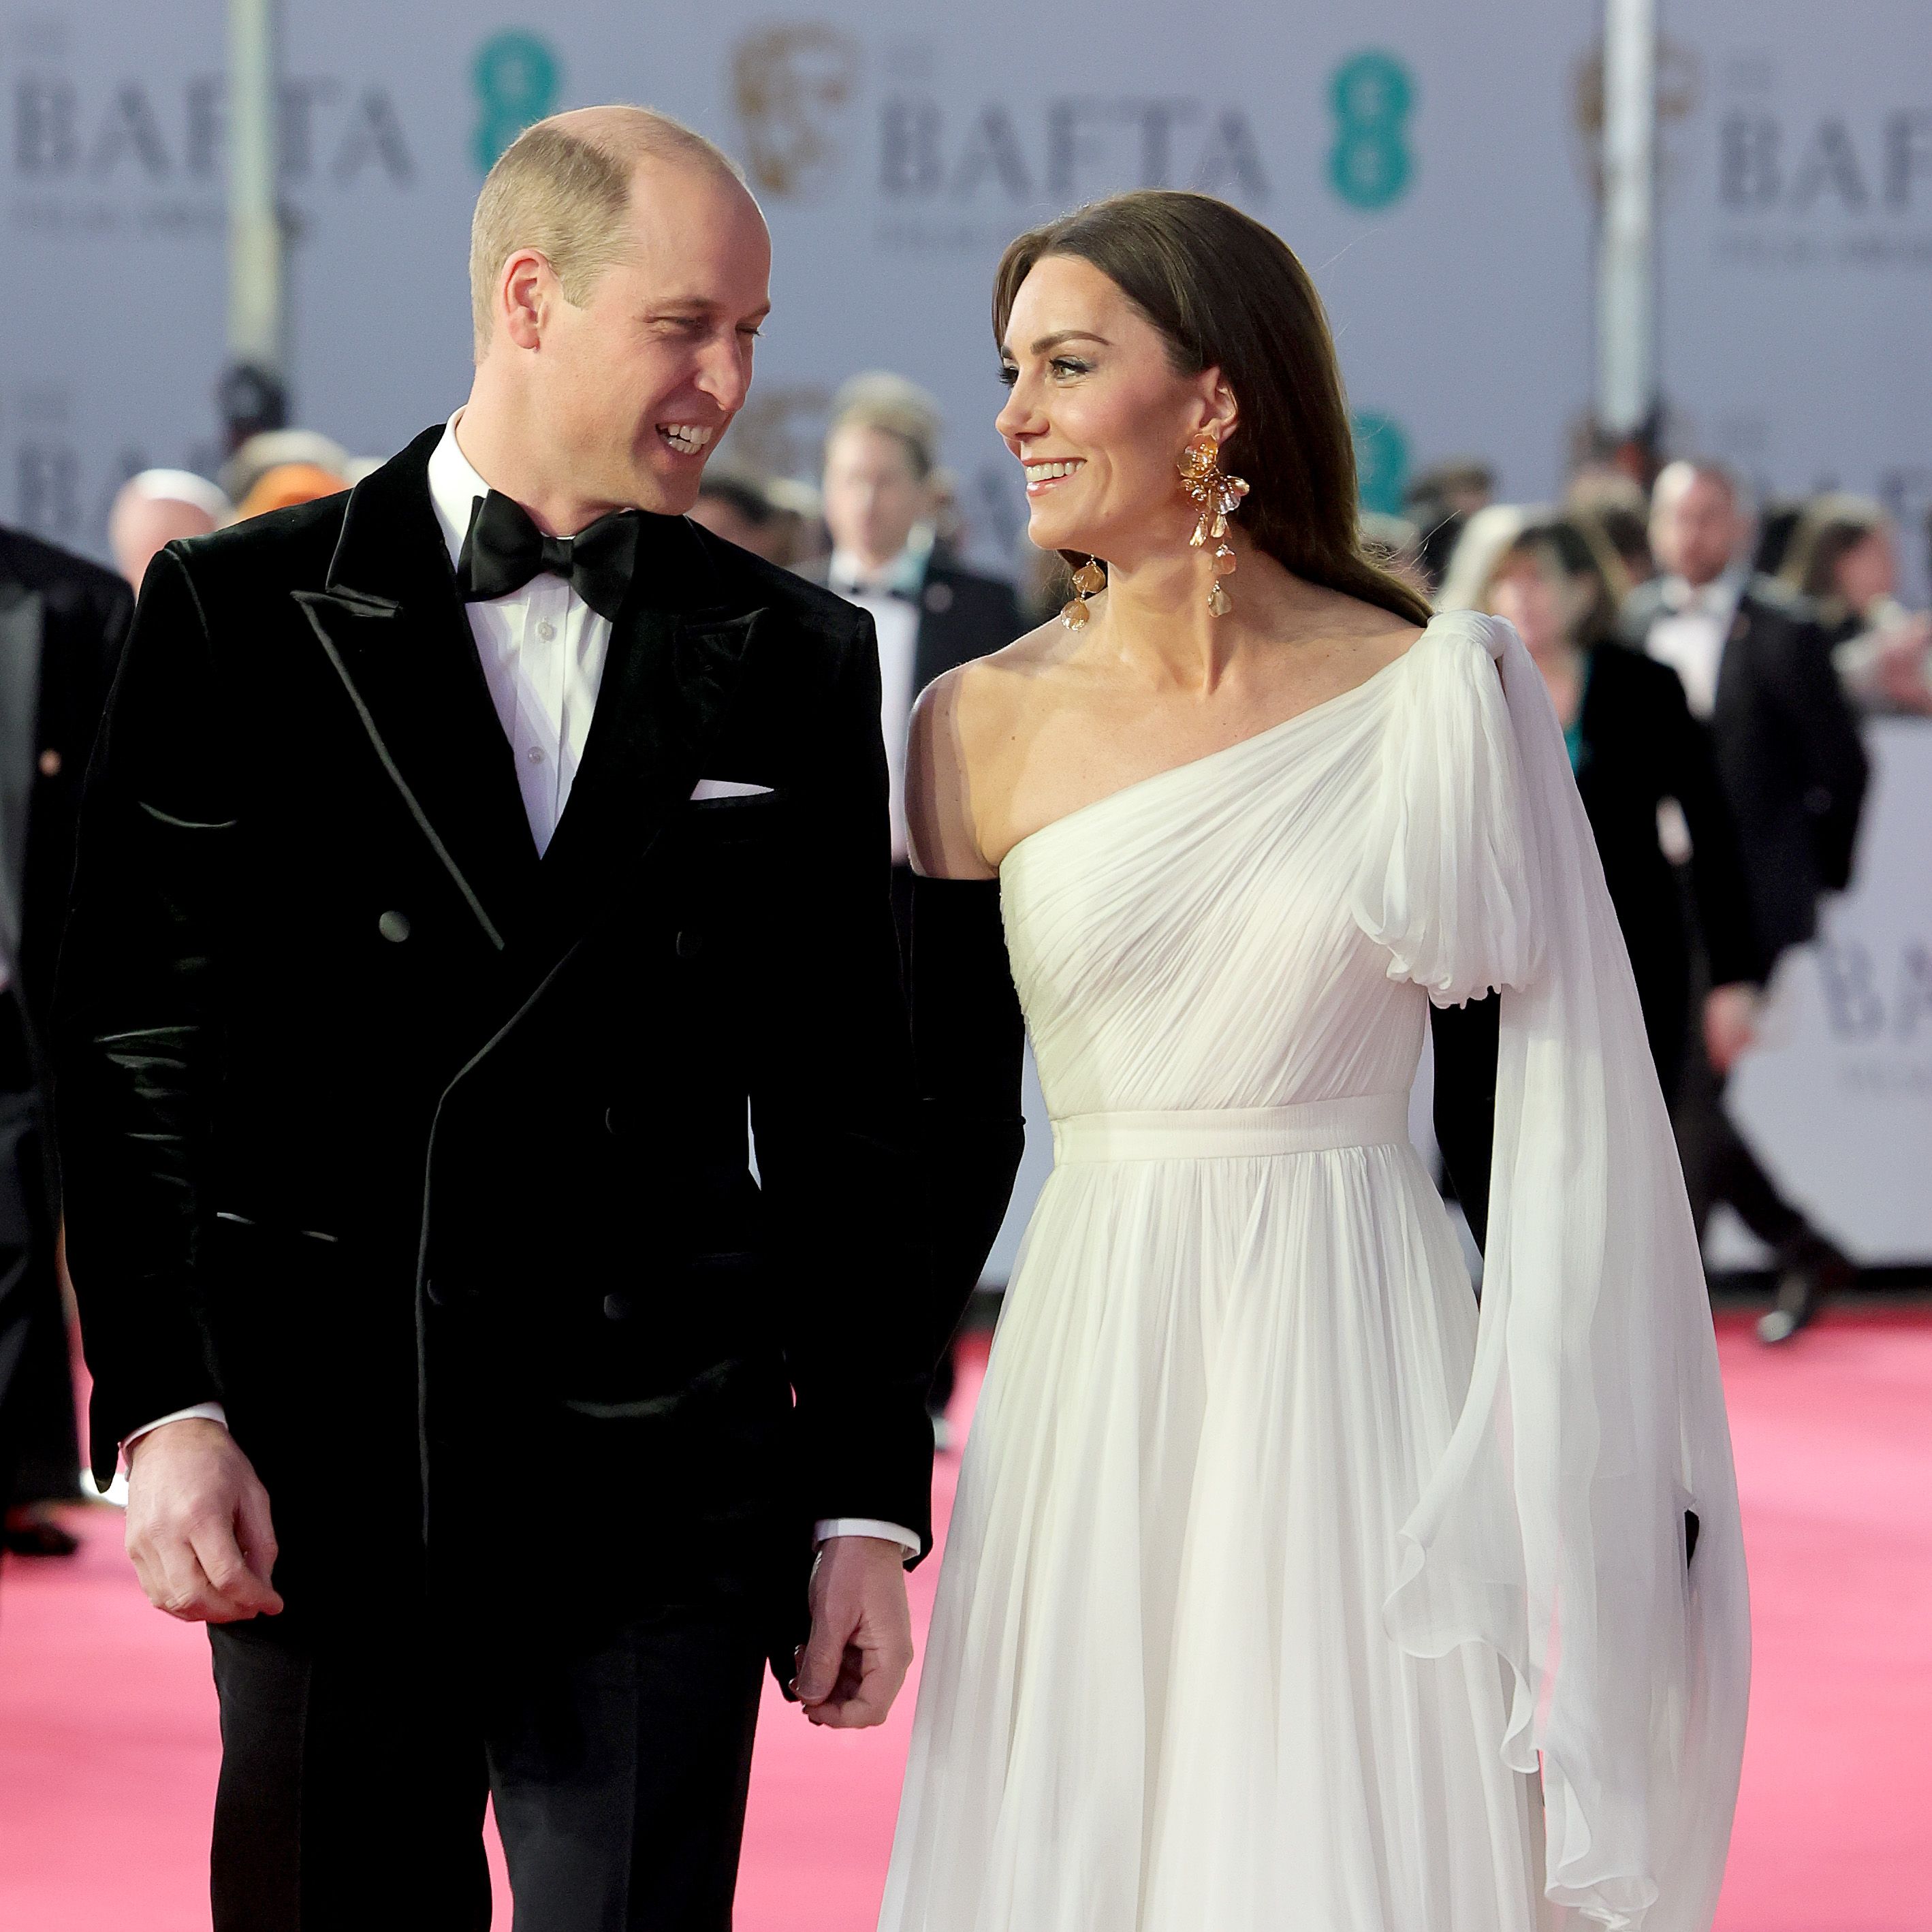 Kate Middleton Pats Prince William's Butt on the BAFTAs Red Carpet in Rare PDA Moment